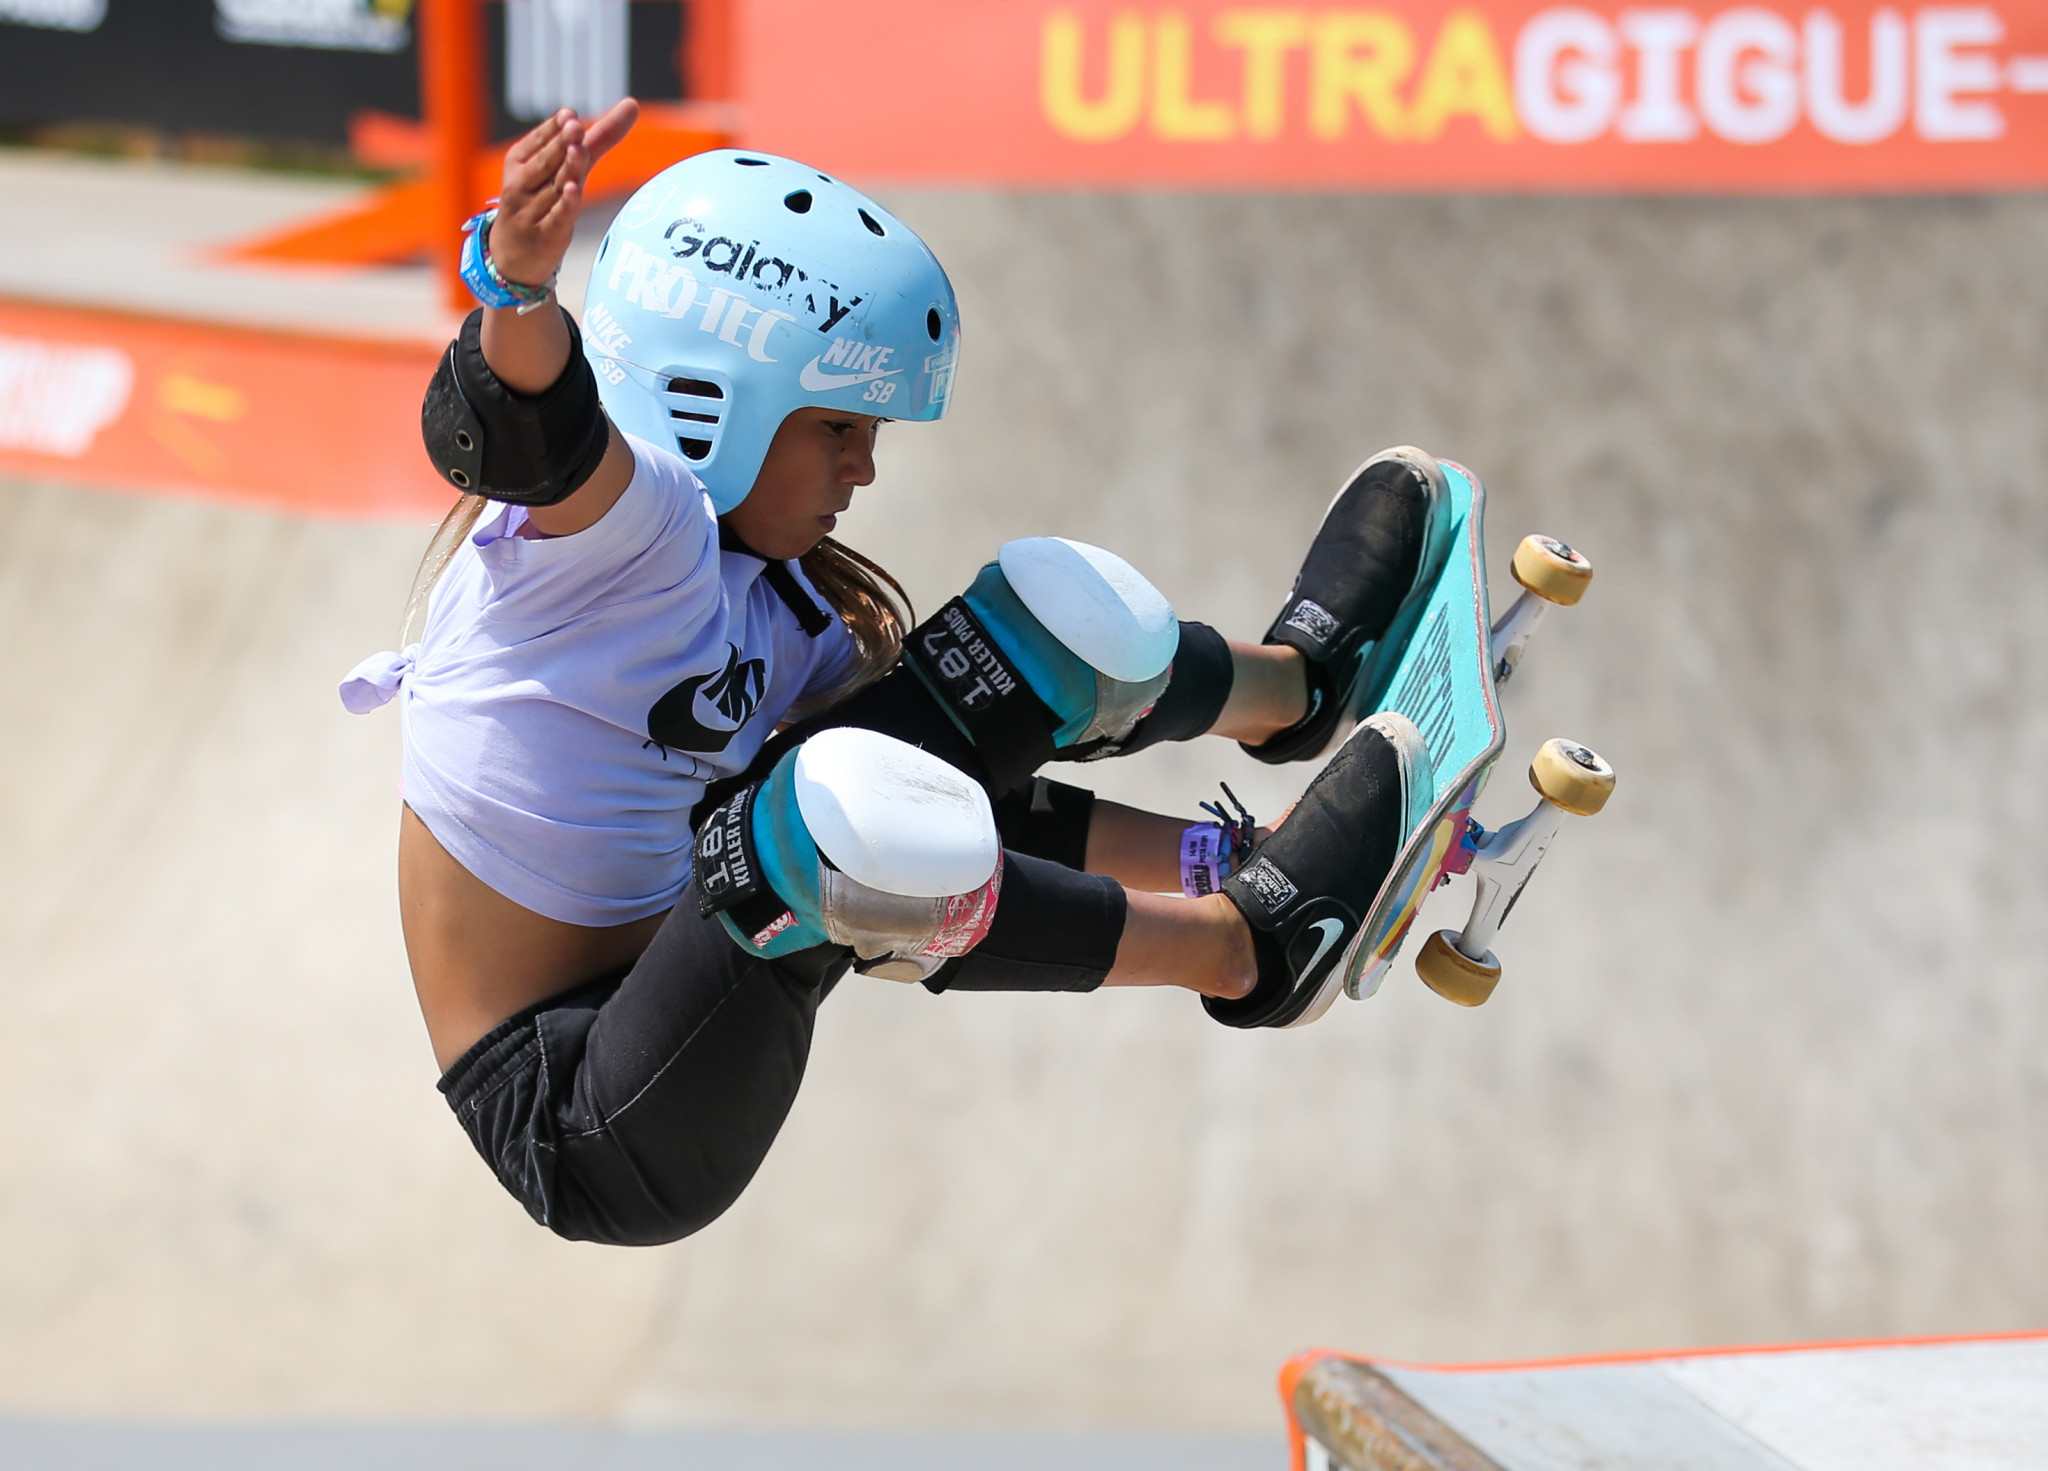 Sky Brown's bronze medal at the World Skating Championships helped GB Skateboarding receive extra funding ©Getty Images